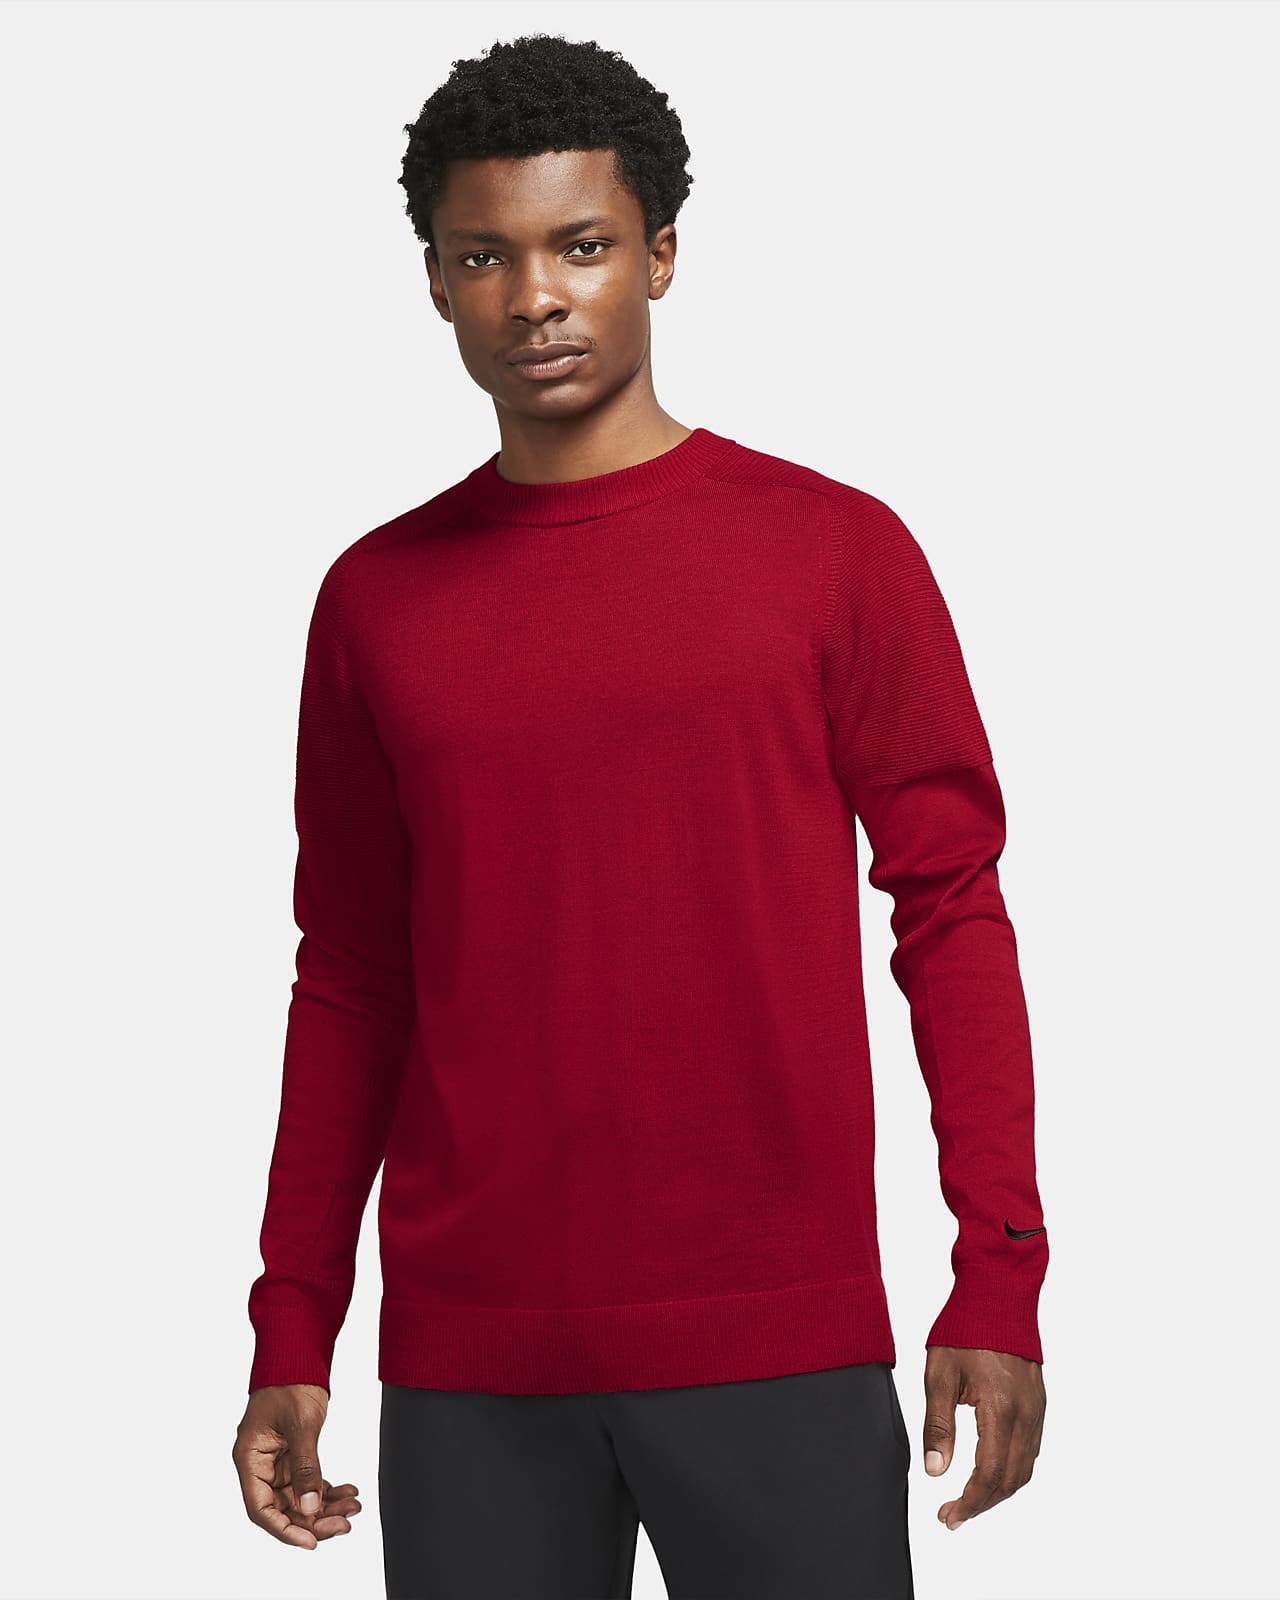 tiger woods nike sweater